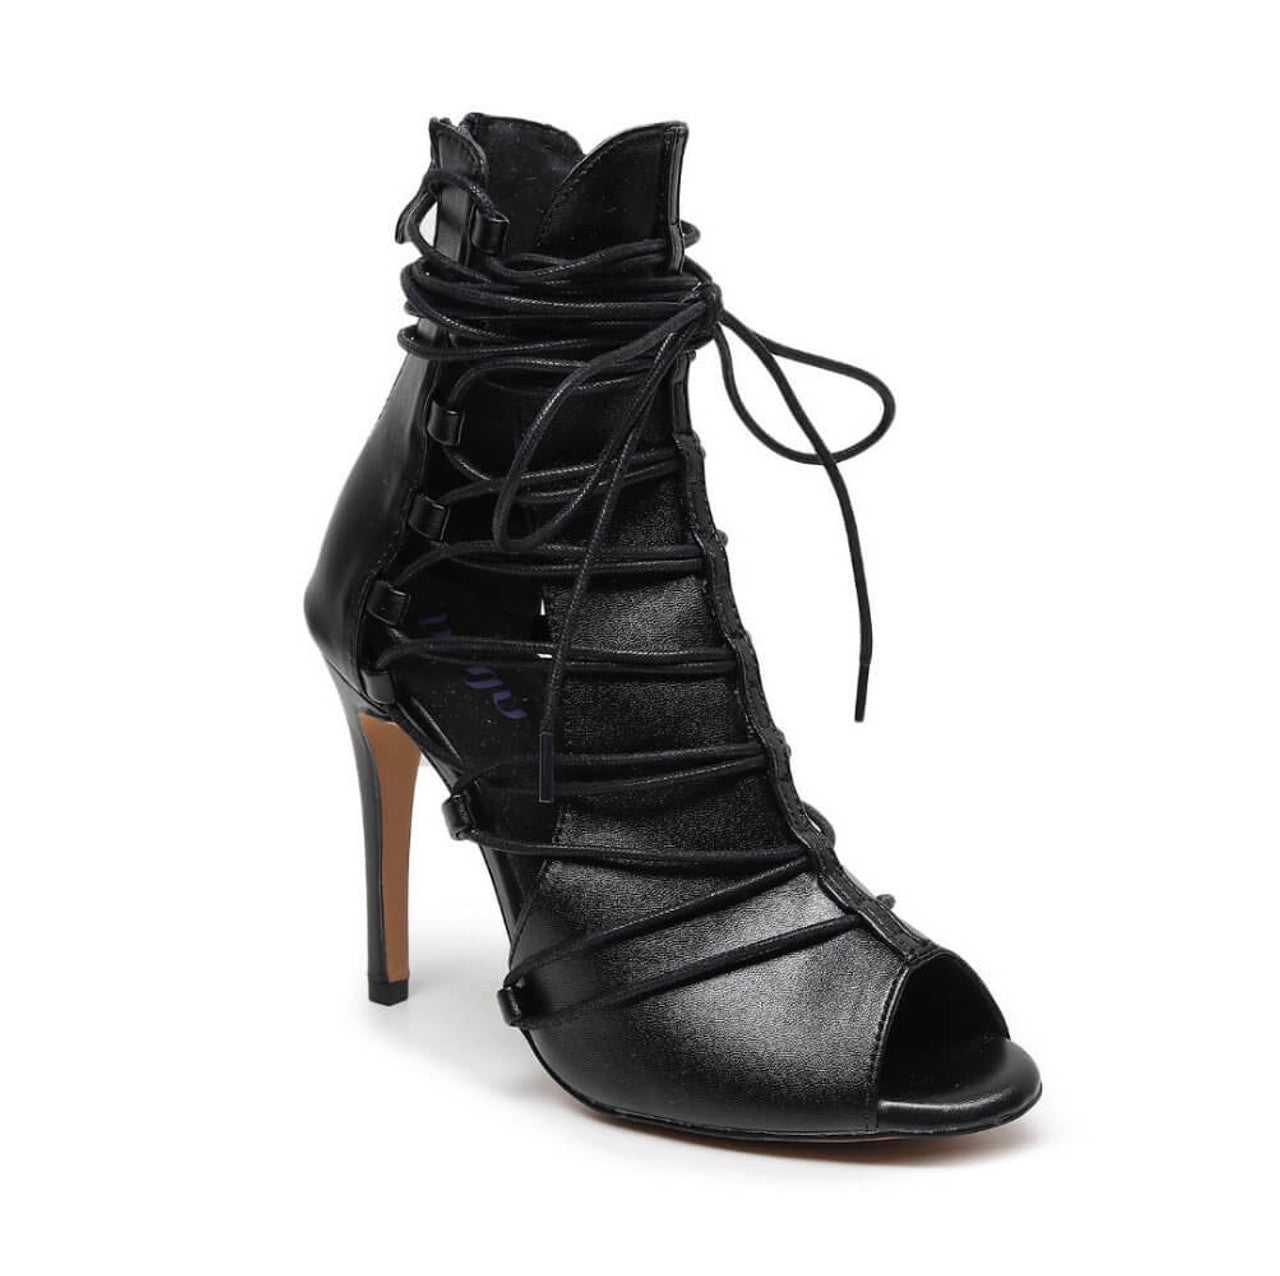 Stylish Latin and Salsa Dance Shoes for Women | Adore Dance Shoes